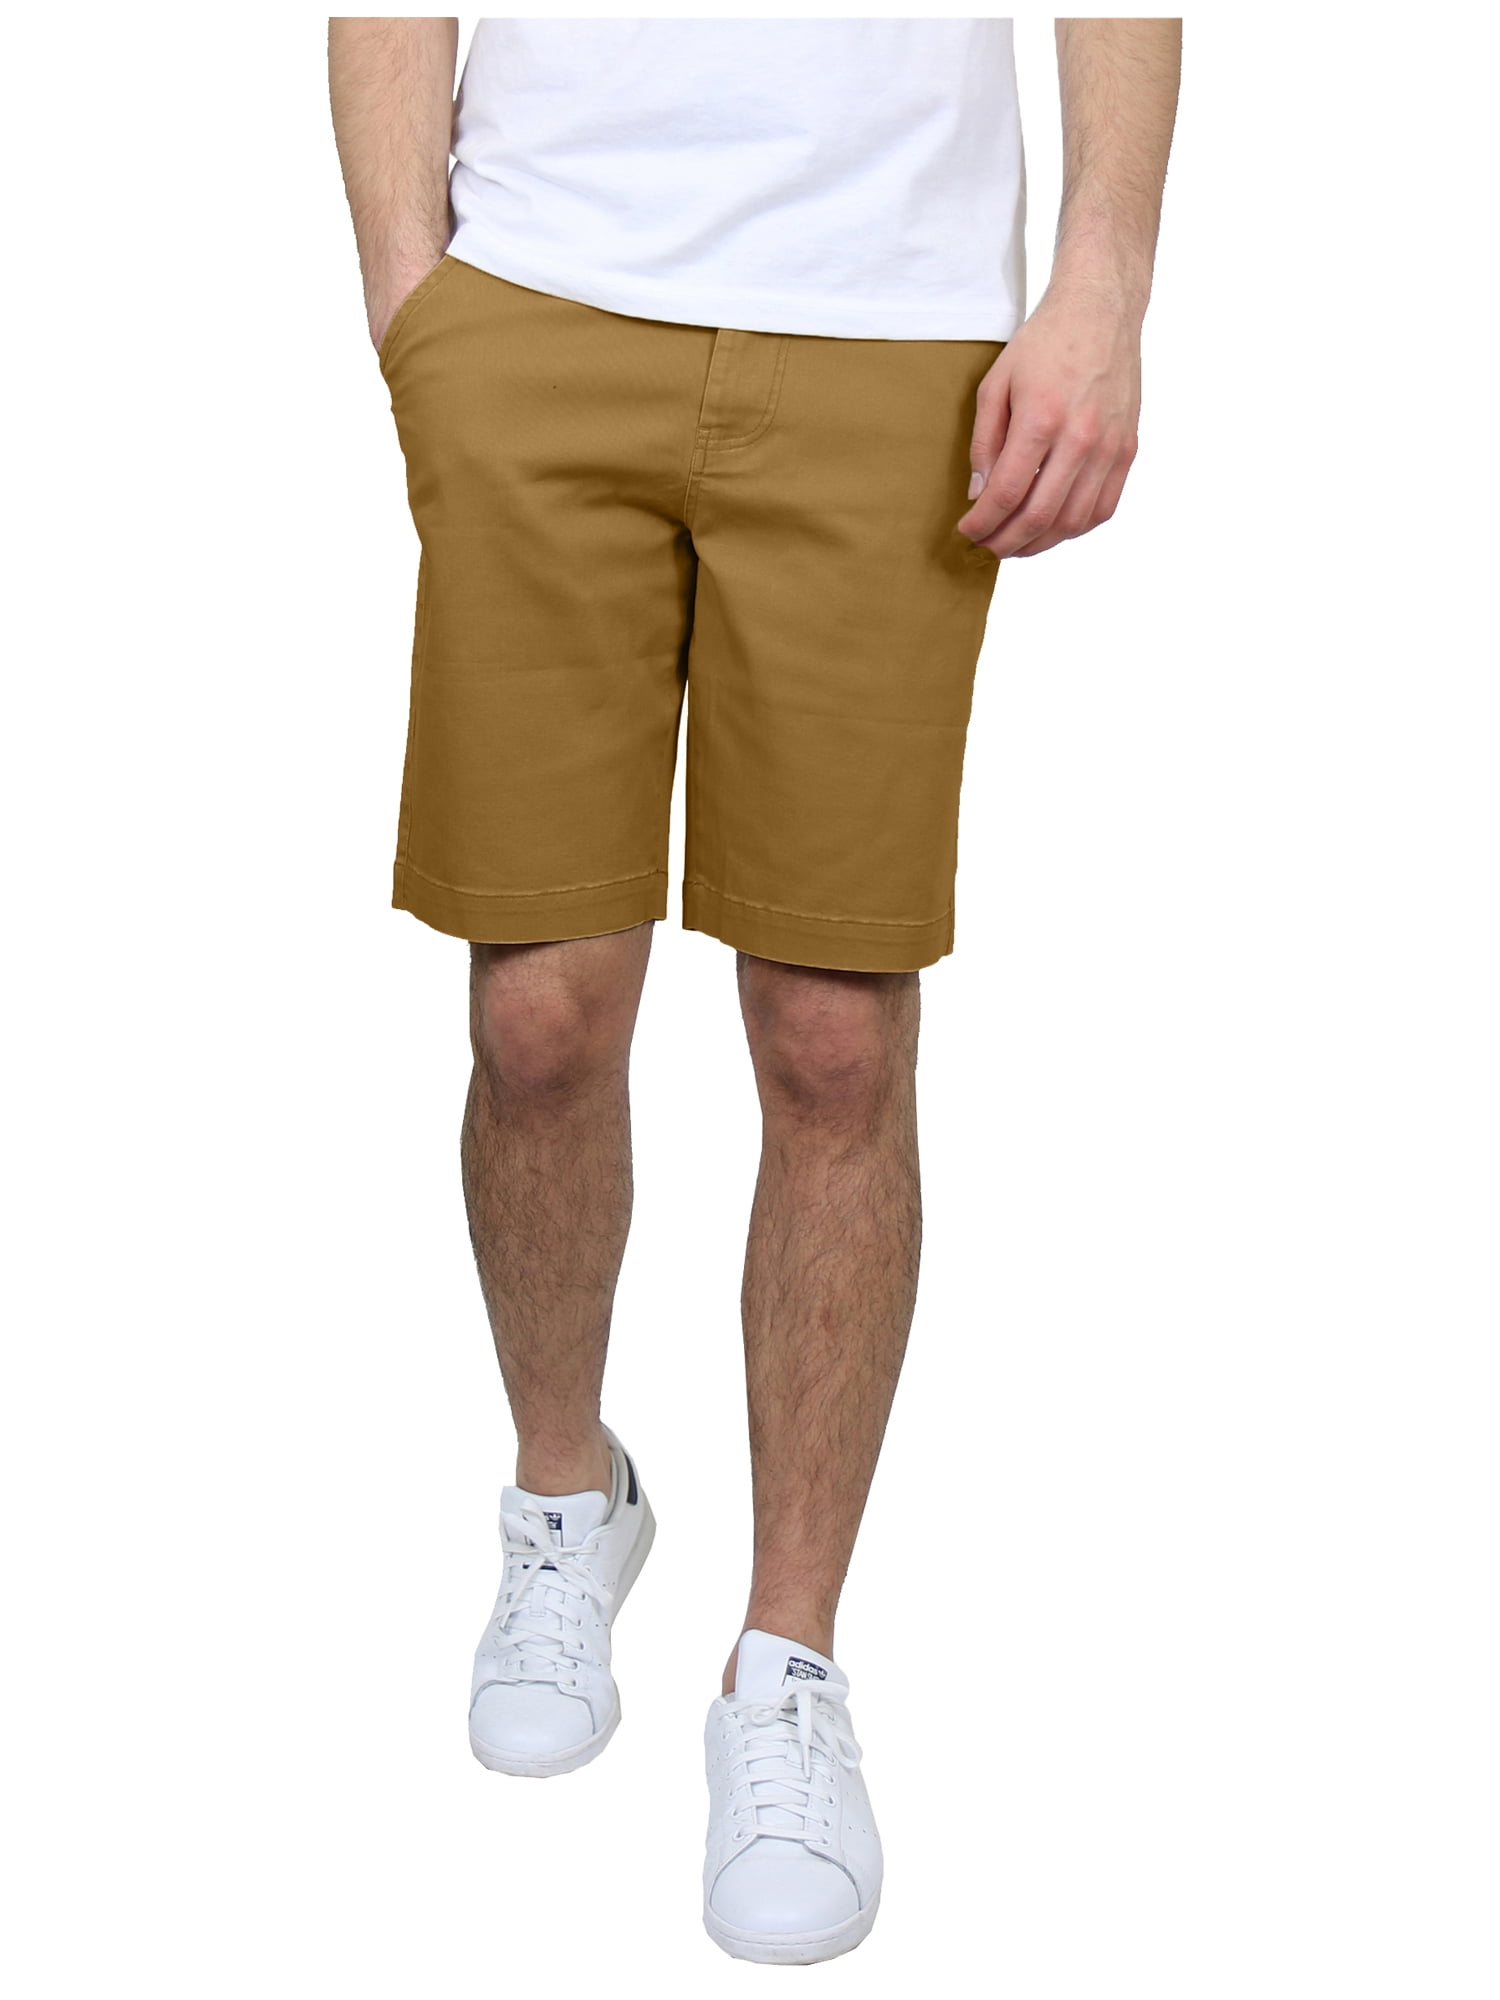 Homme Stretch Short Chino Flat-Front 5-poches Summer Casual Slim-fit Belted Neuf avec étiquettes 